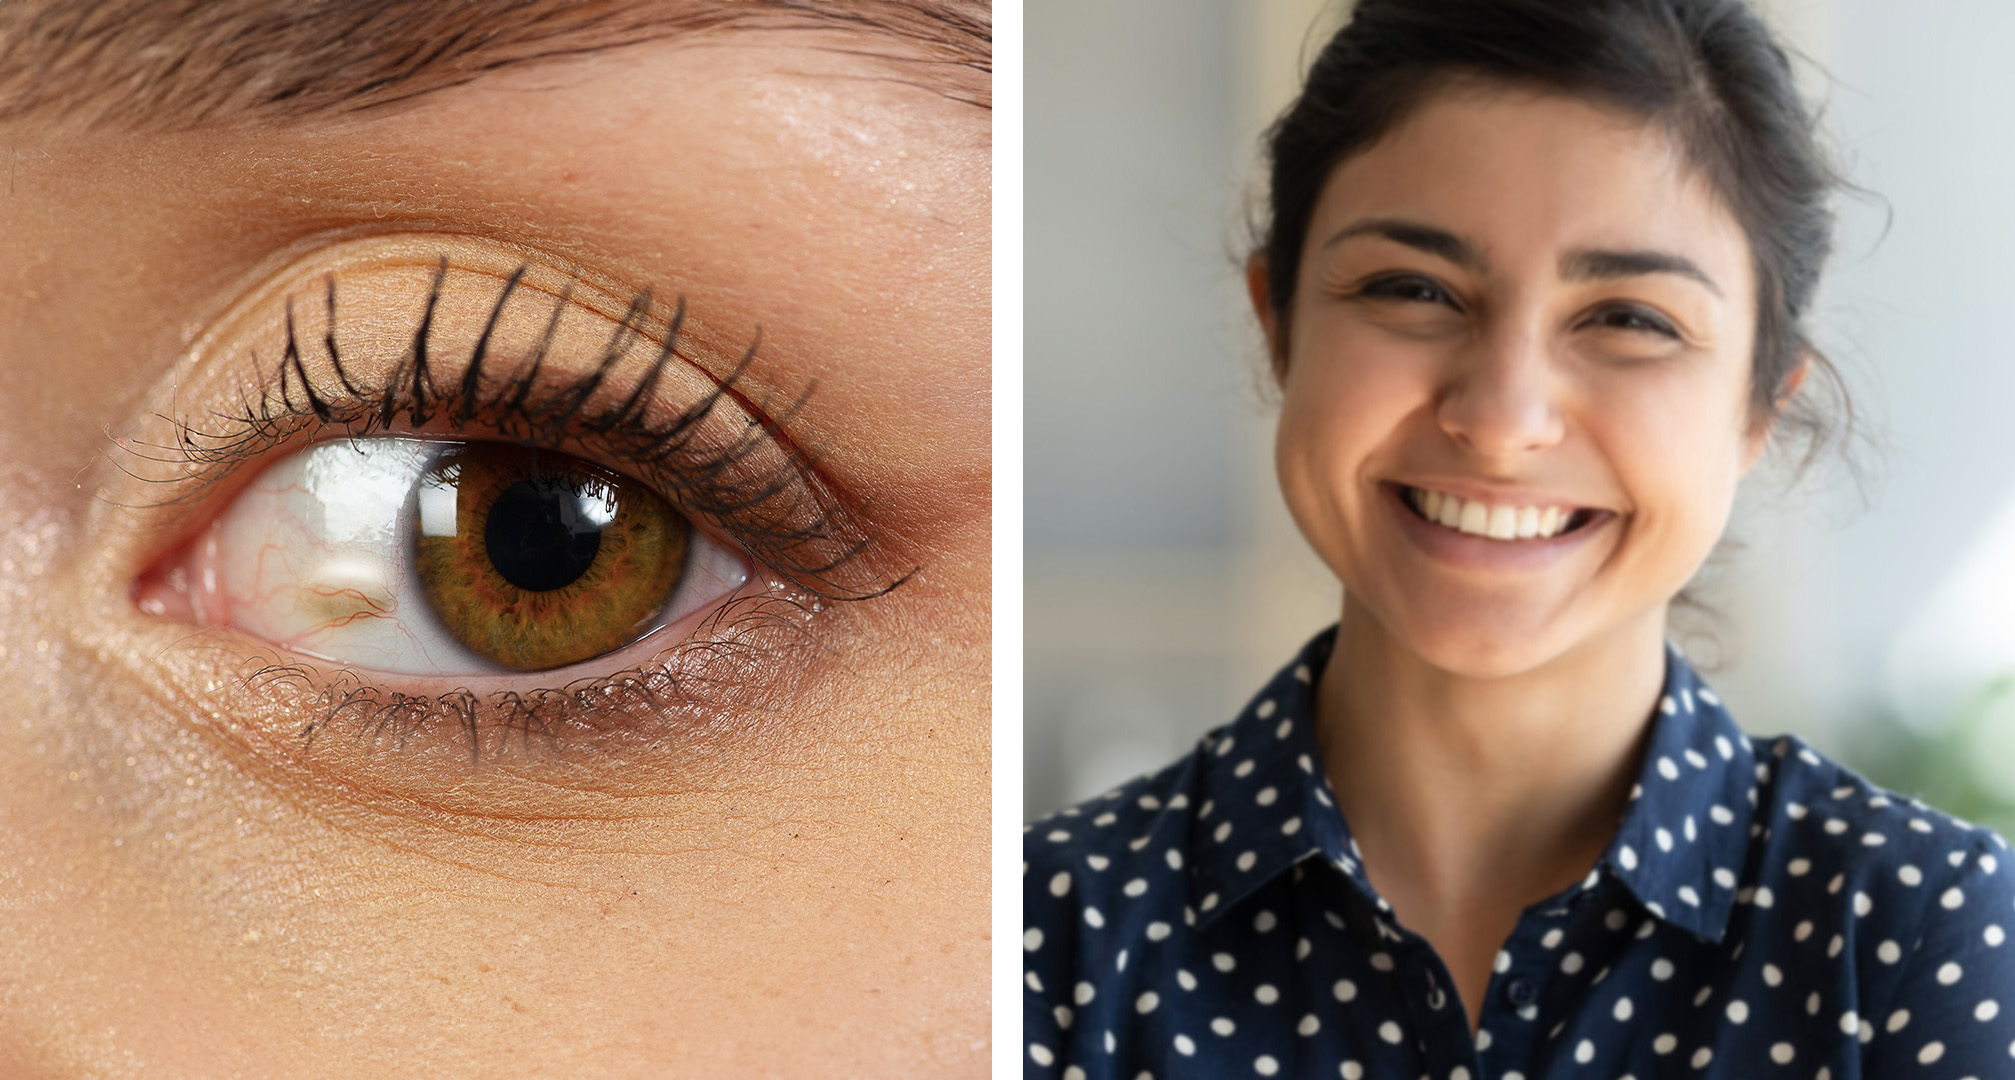 Pinguecula looks like a small, raised growth on the white part of the eye (left). The growth itself doesn't affect vision, but it can cause dryness or irritation that can lead to blurred vision (right).